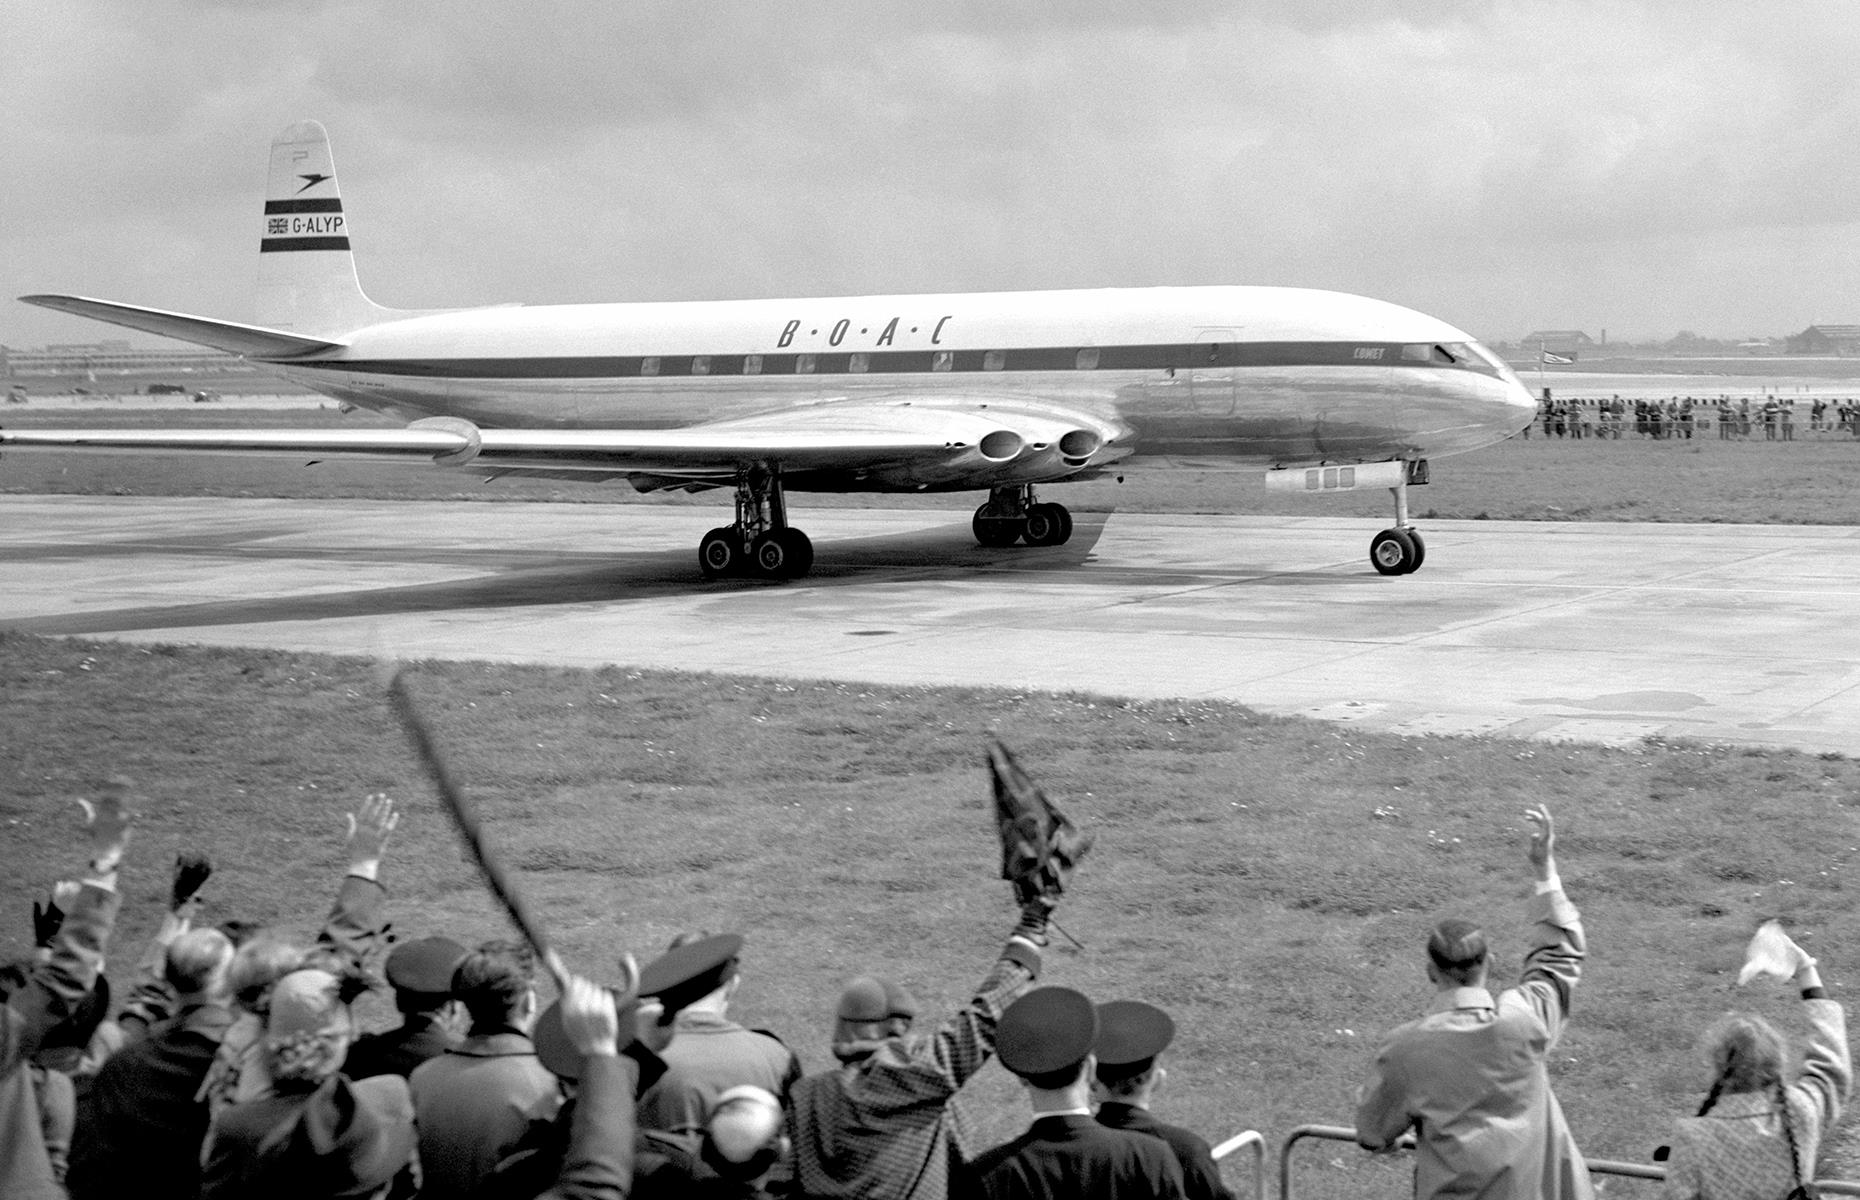 Commercial air travel boomed through the 1950s and, for the first time in history, more US passengers were traveling by air than train. The 1950s also ushered in the "jet age". The de Havilland DH 106 Comet became the world's first commercial jet airliner, debuting in 1952 with the British Overseas Airways Corporation (BOAC). Here, crowds are seen waving the aircraft off as it leaves London for Johannesburg, South Africa.